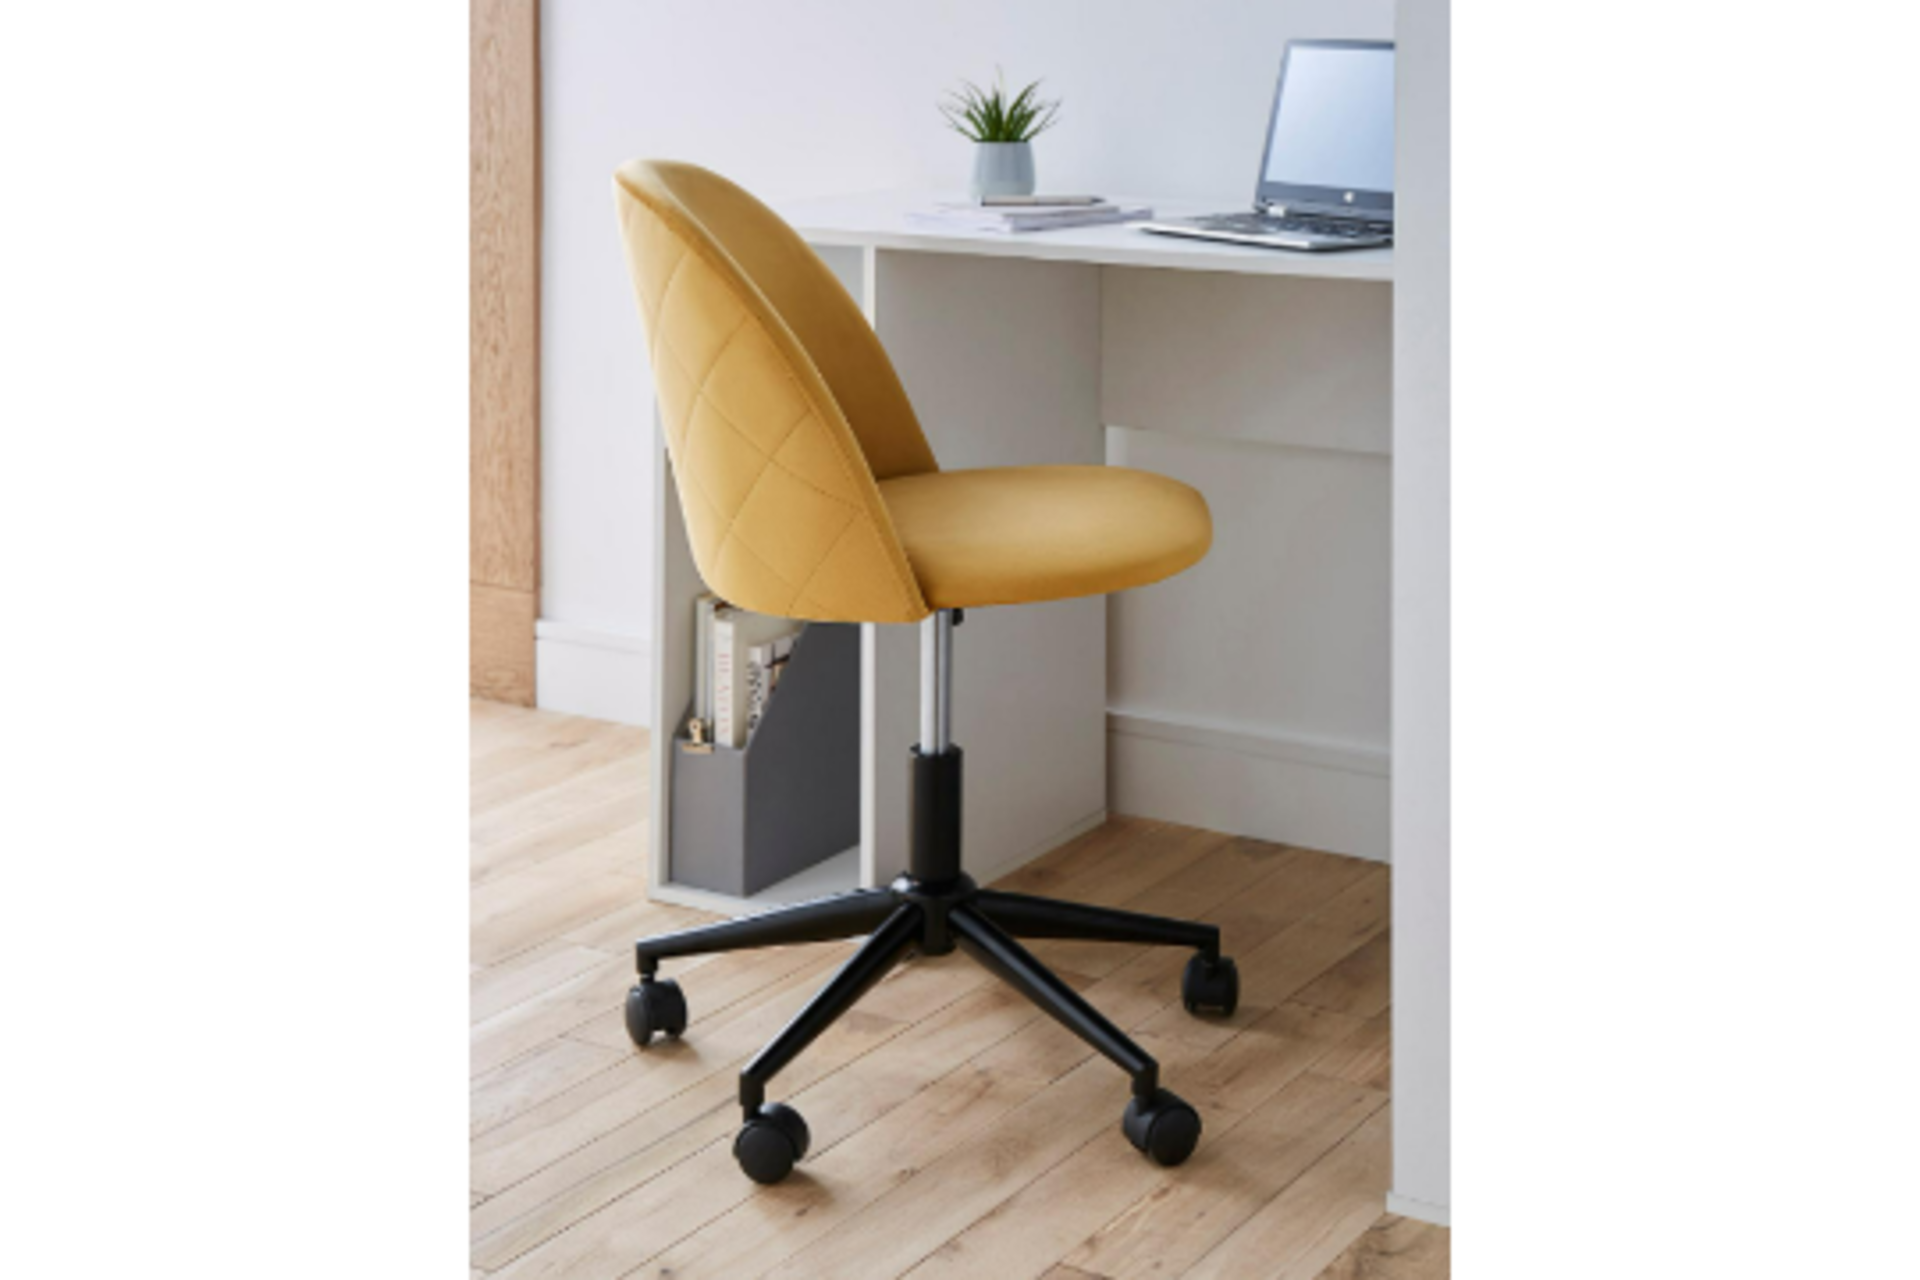 Pallet To Contain 9 x New & Boxed Klara Office Chair - Ochre. RRP £199 each. The Klara Office - Image 2 of 2